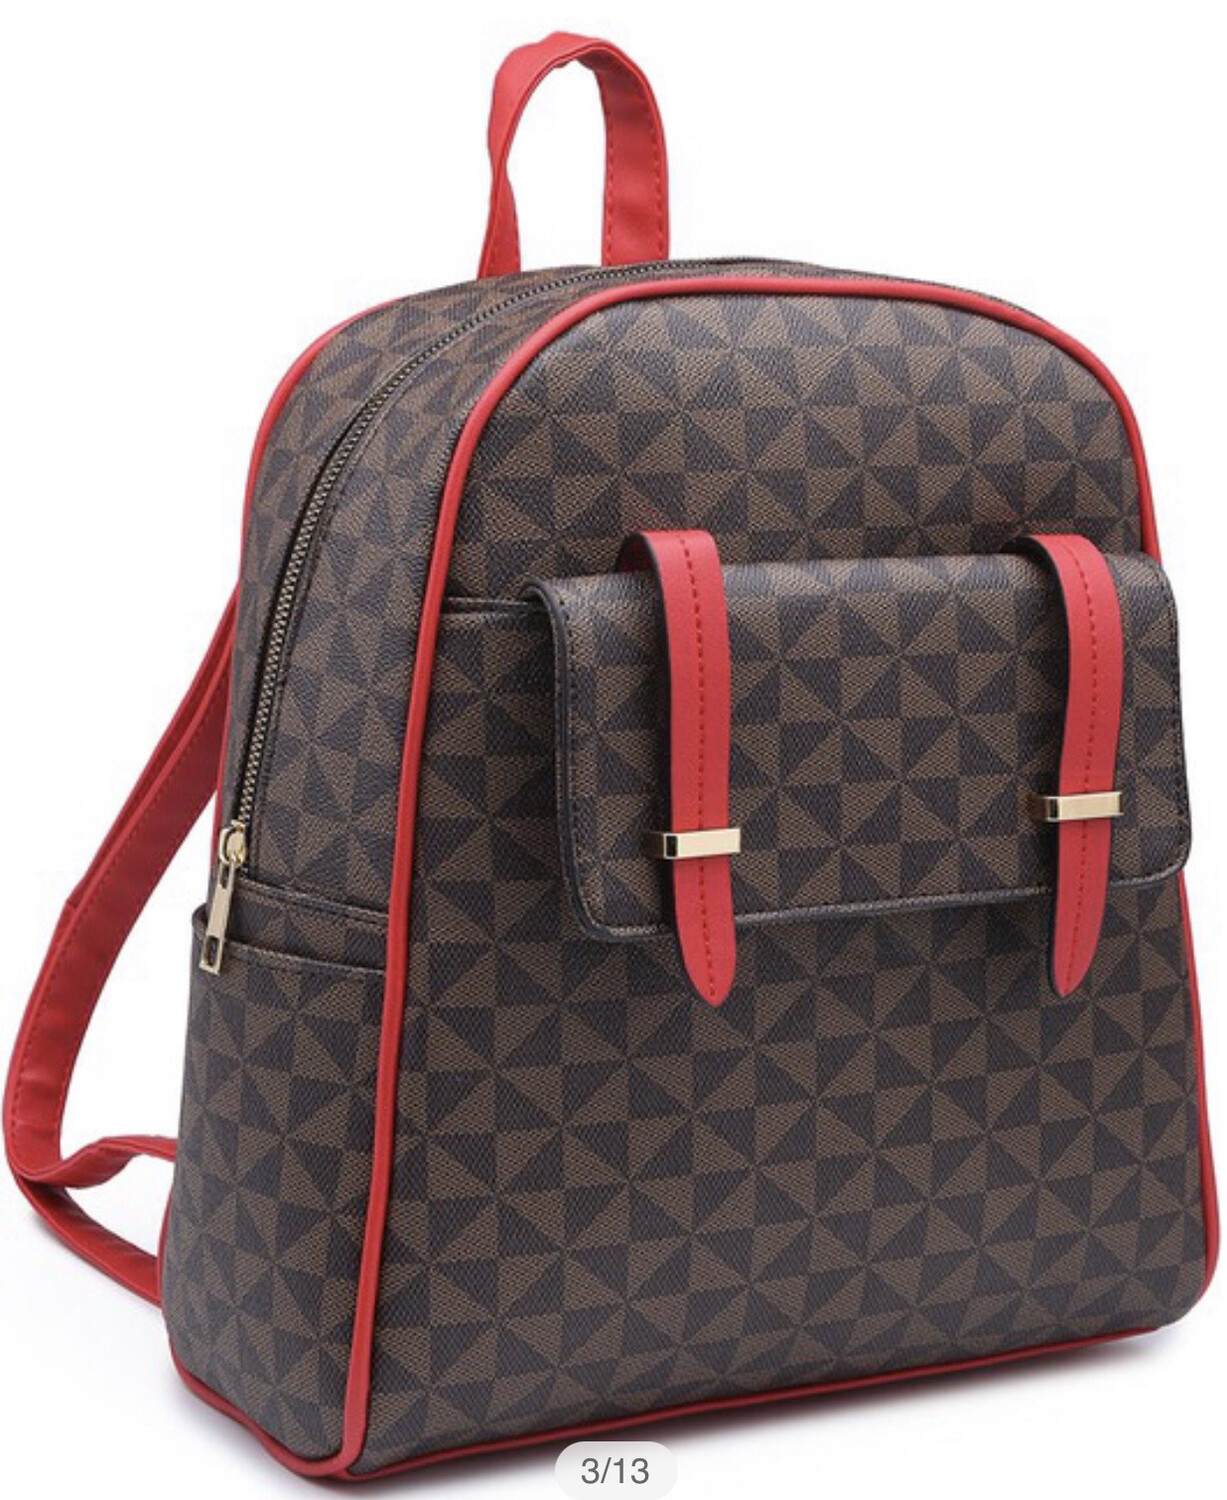 Checkered Flap Backpack